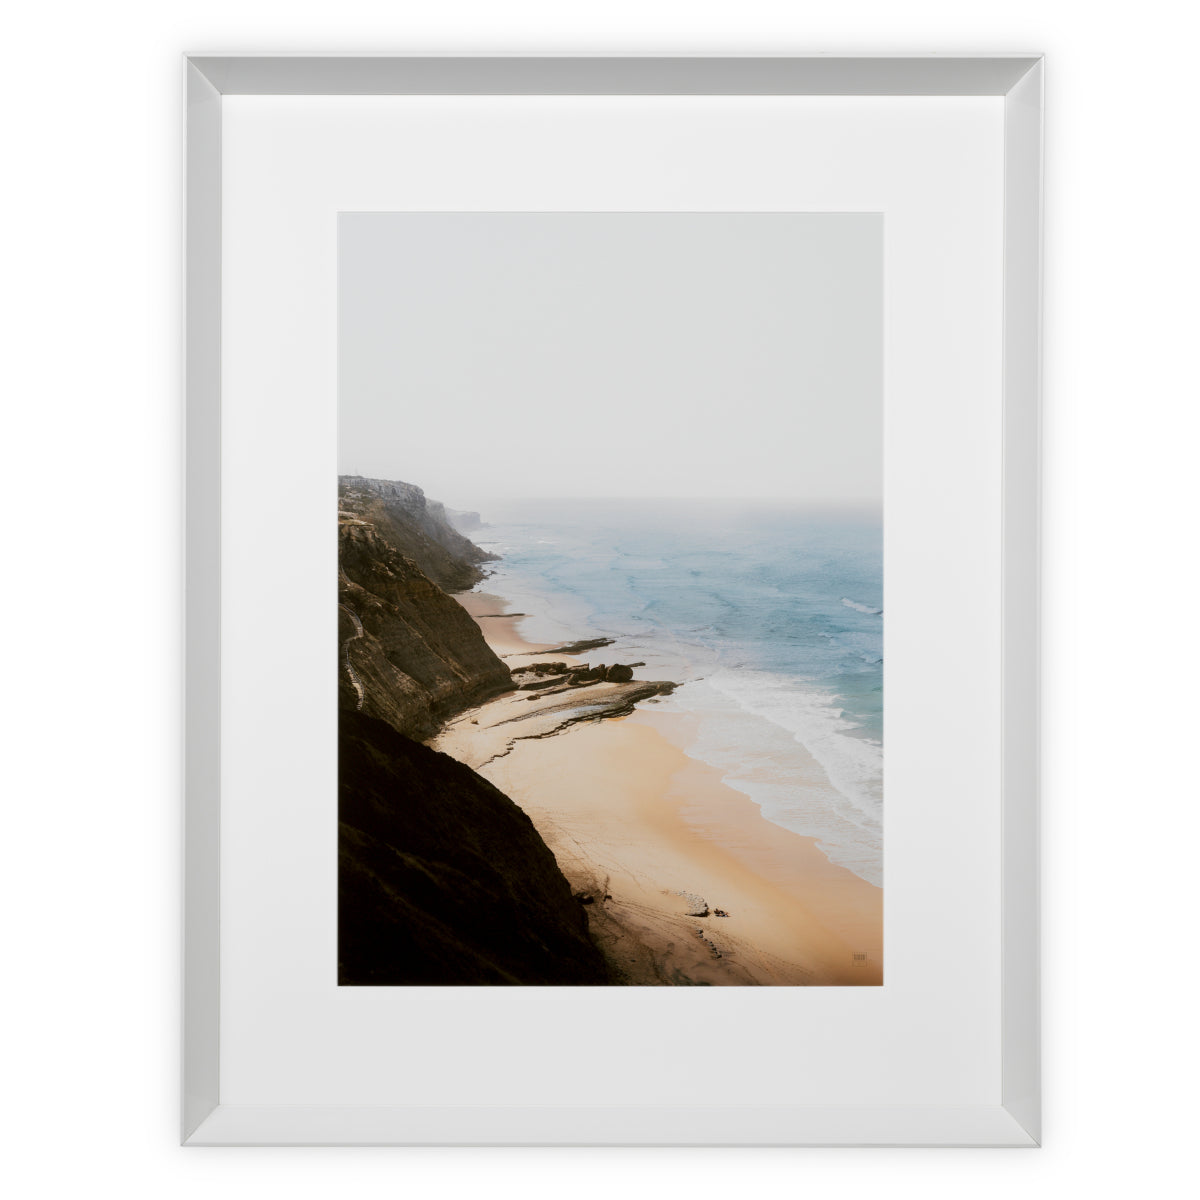 Prints Eichholtz Ocean view by Thao Courtial set of 2